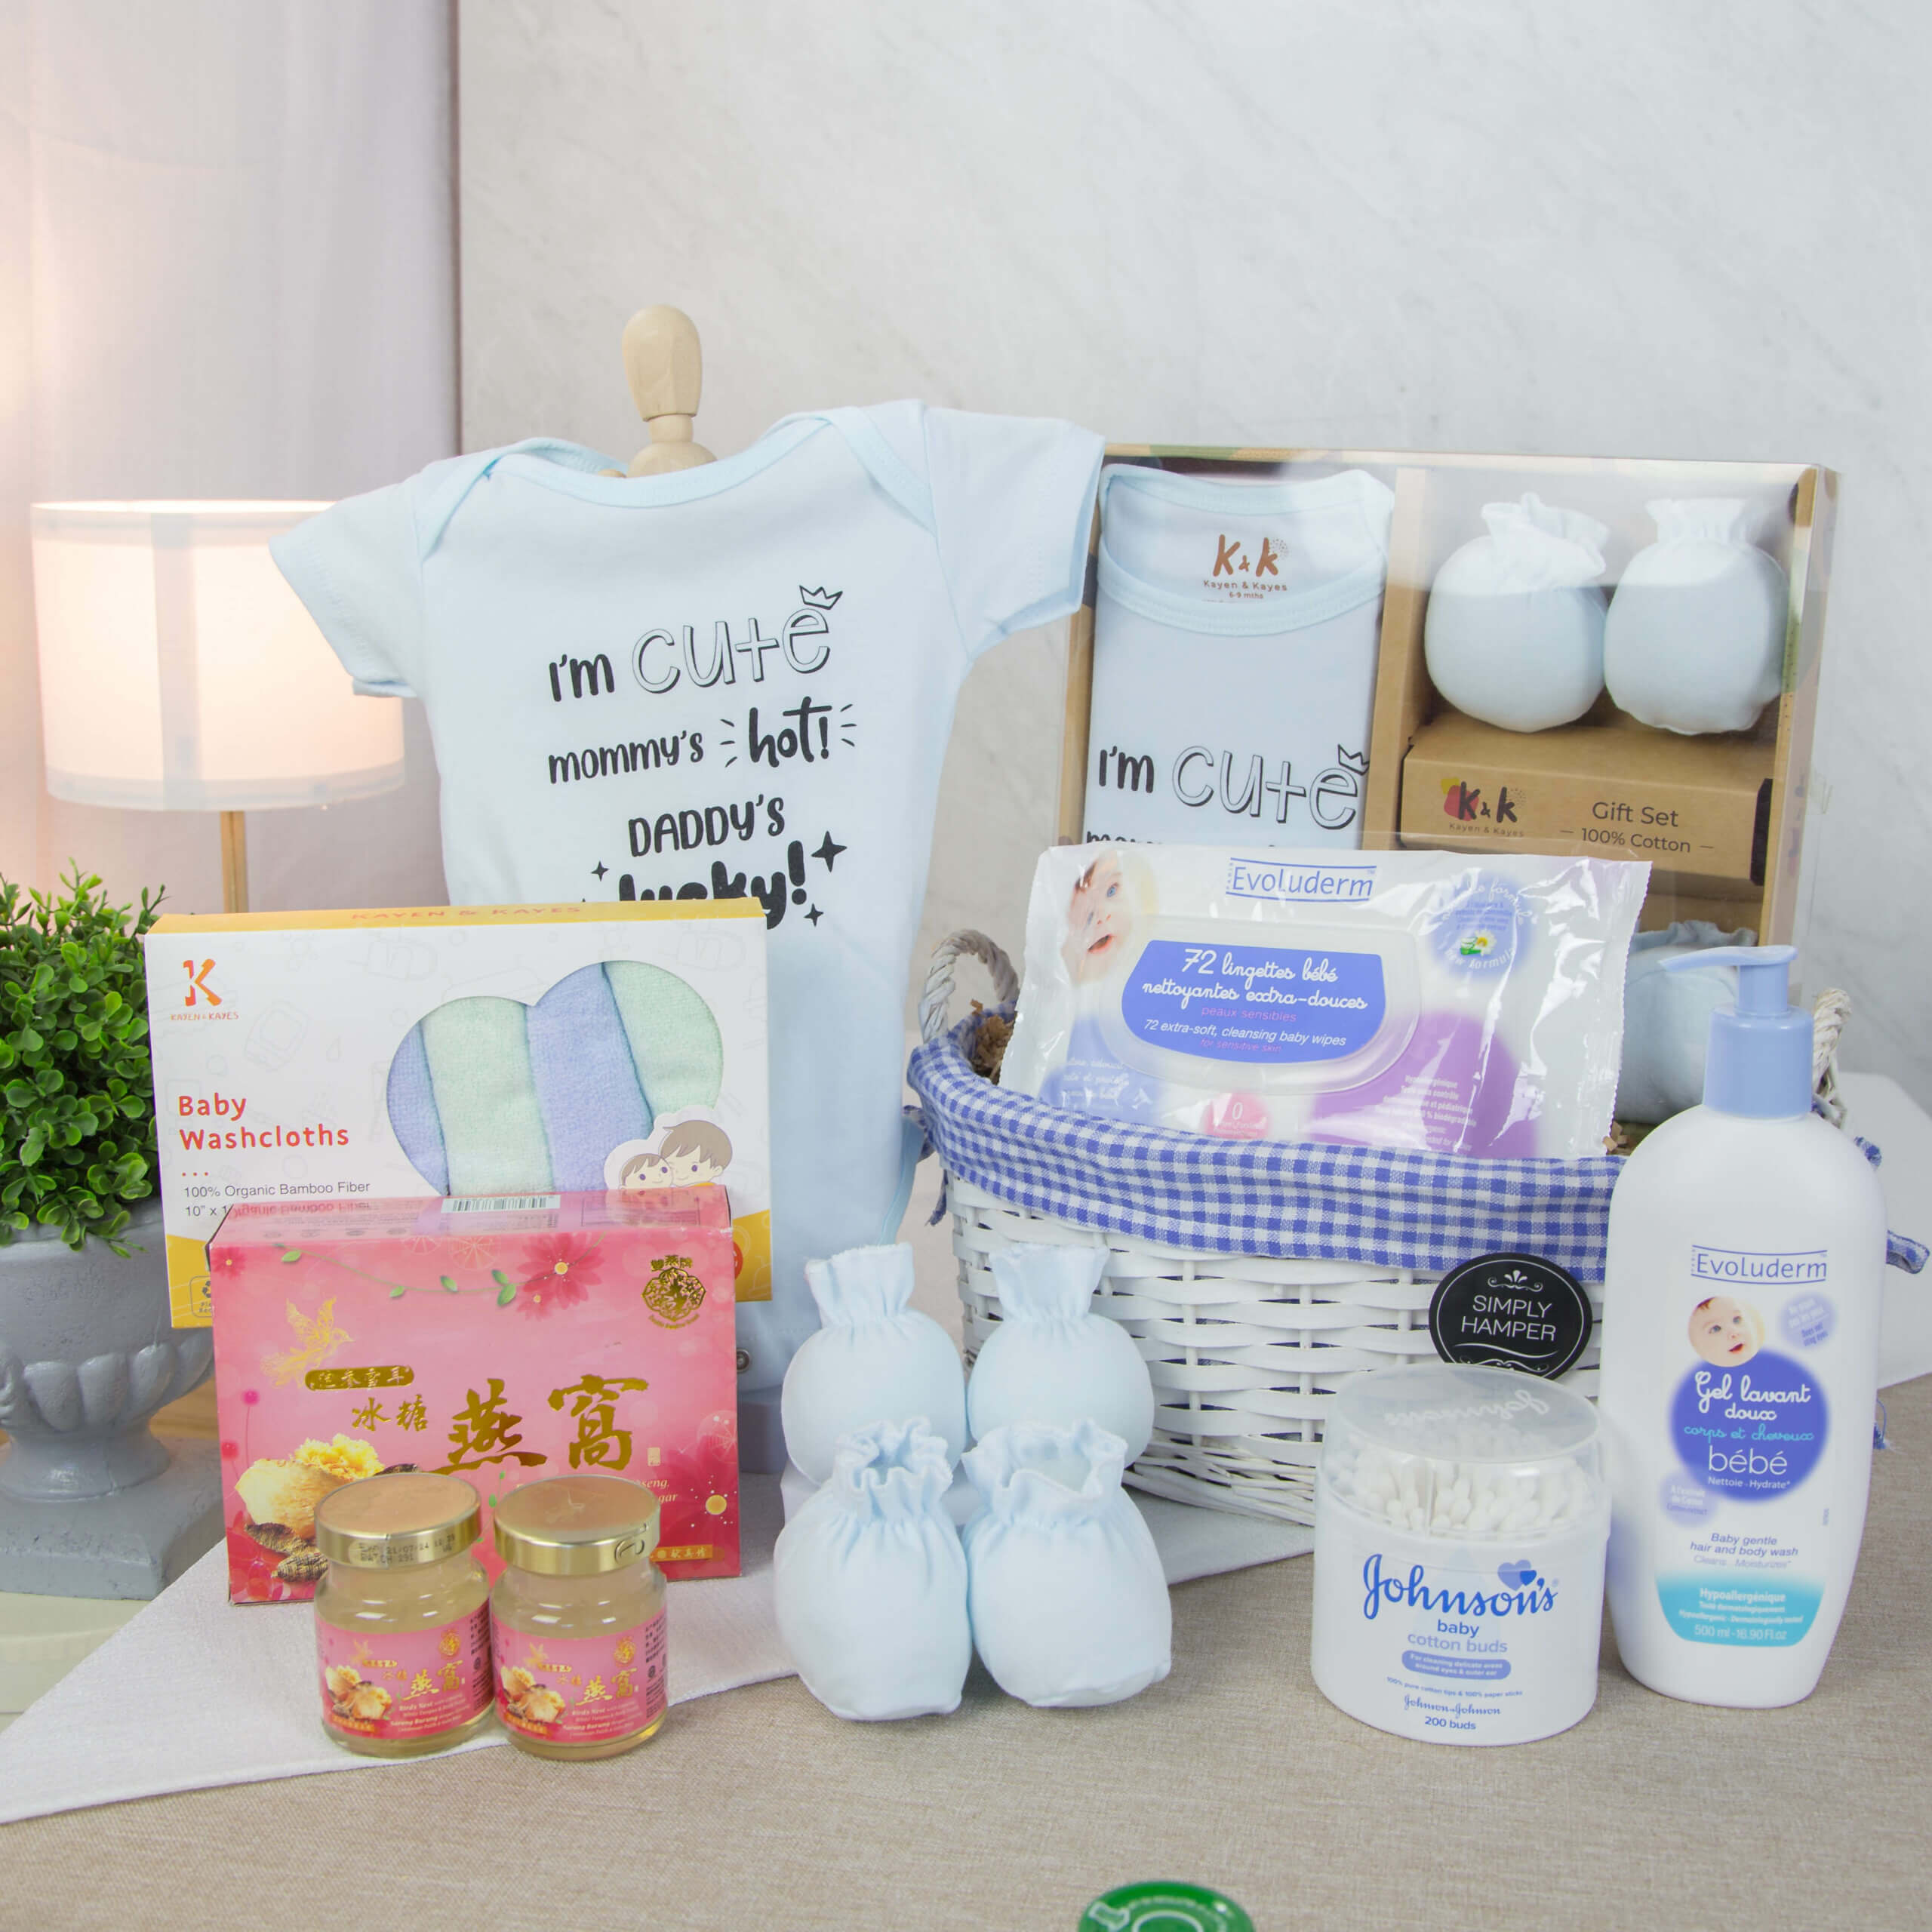 Gifts for New Parents, High Quality Gifts for Parents and New Arrivals